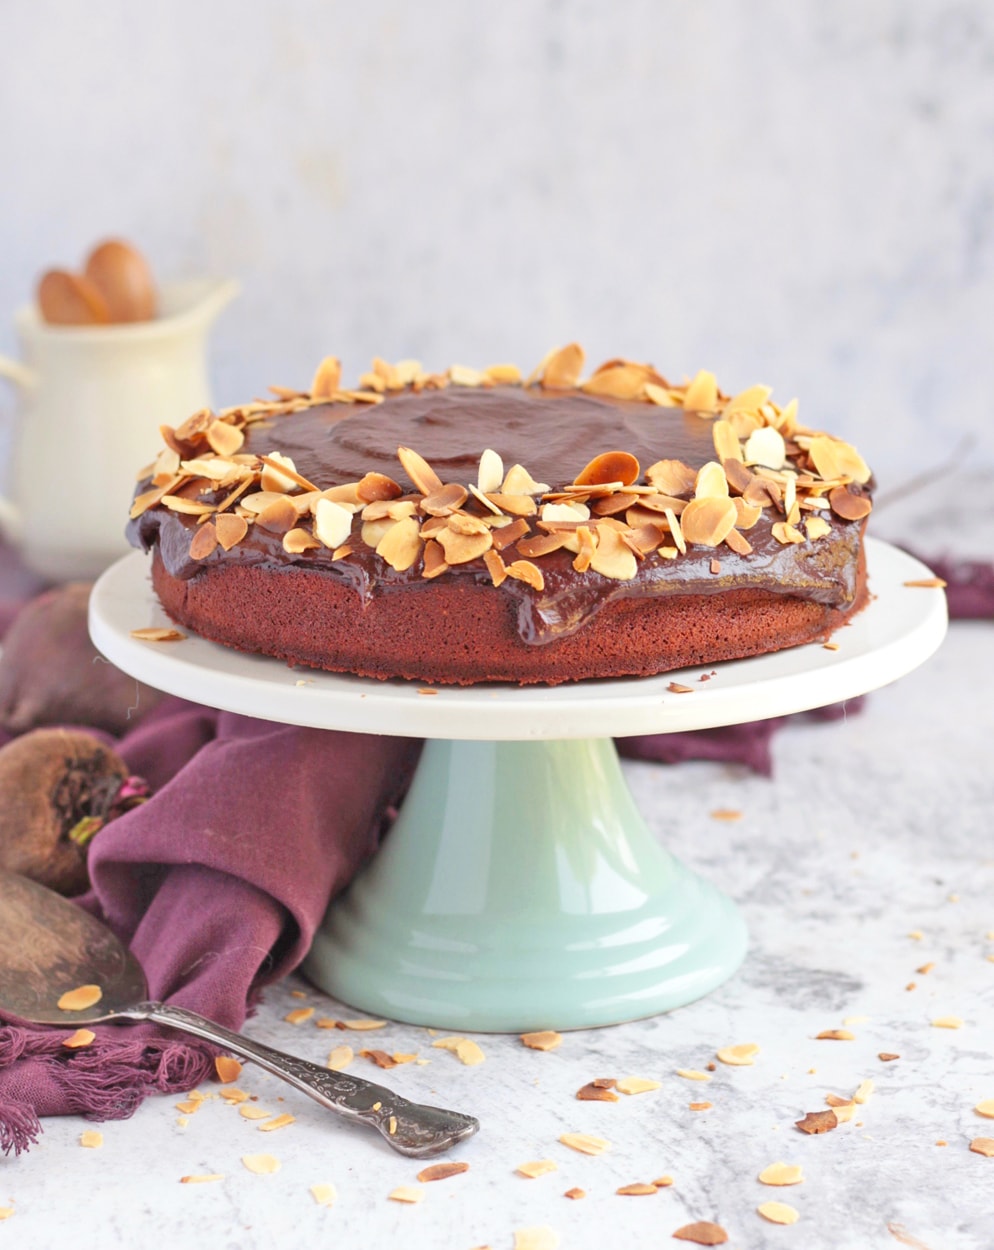 Chocolate Cake on a Cake Stand with chocolate ganache and toasted almond flakes